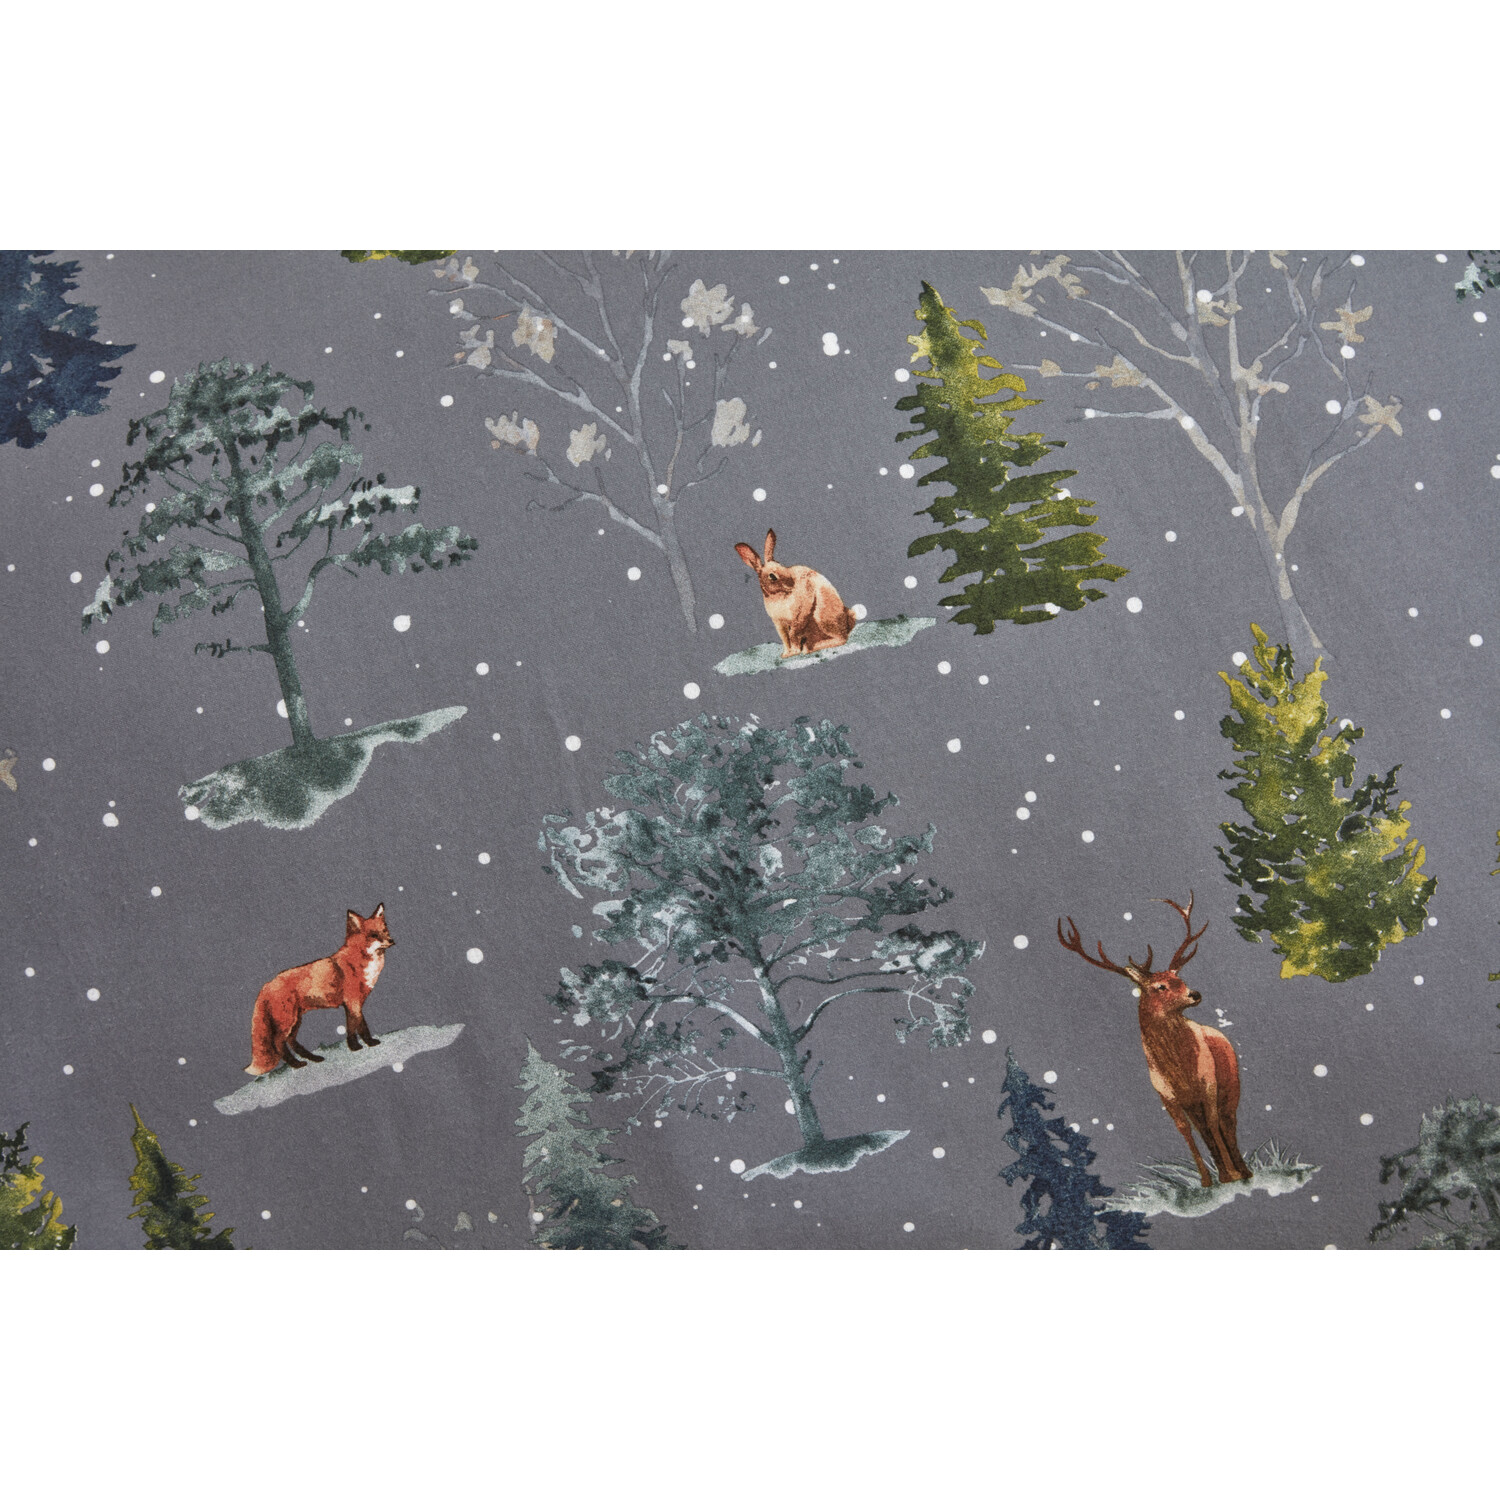 Snowy Forest Duvet Cover and Pillowcase Set - Grey / King Image 5